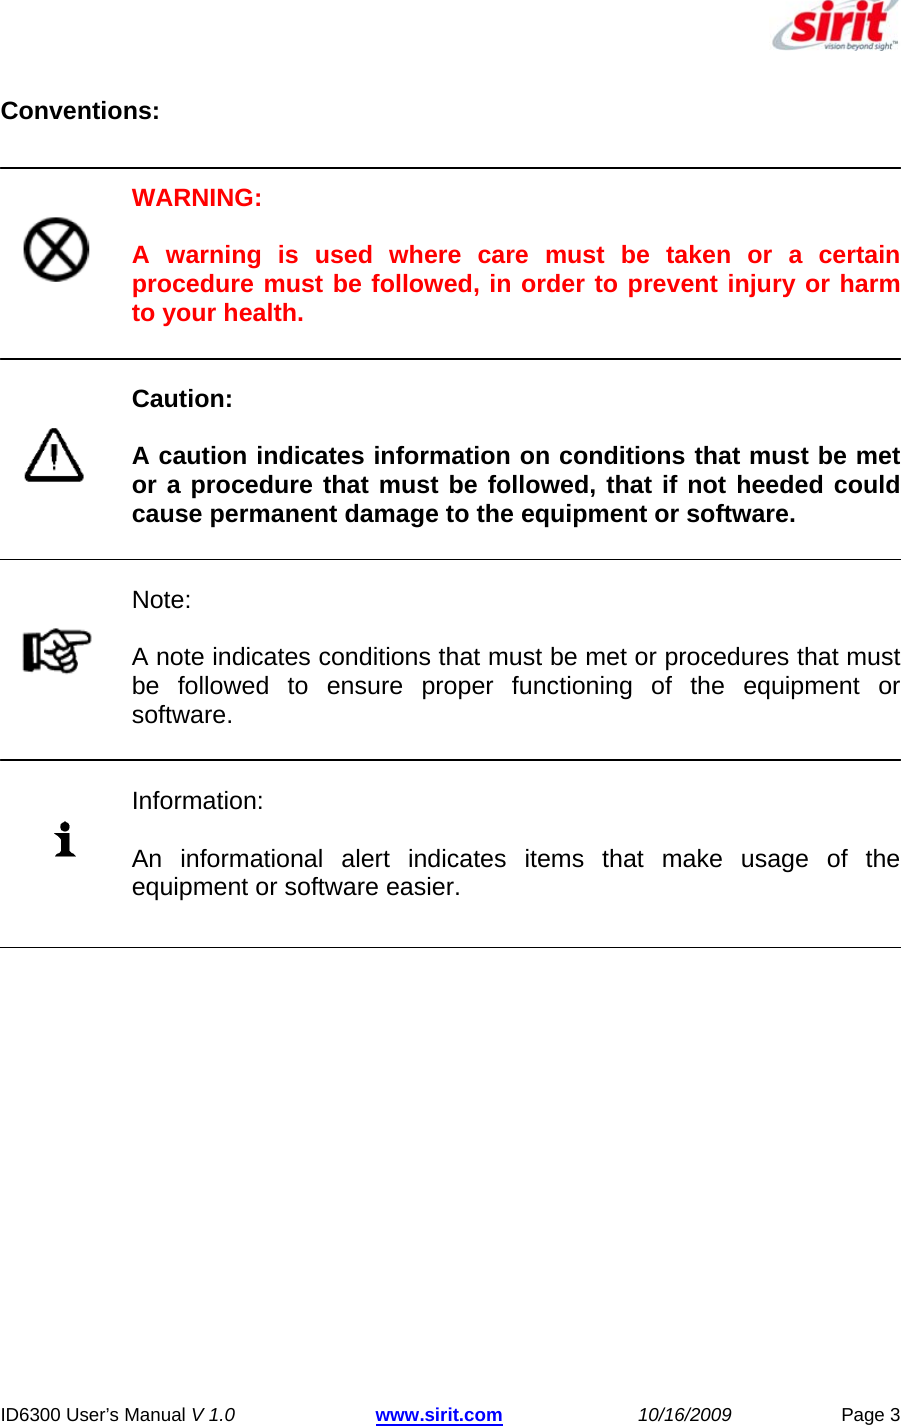  ID6300 User’s Manual V 1.0 www.sirit.com 10/16/2009 Page 3  Conventions:   WARNING:  A warning is used where care must be taken or a certain procedure must be followed, in order to prevent injury or harm to your health.   Caution:  A caution indicates information on conditions that must be met or a procedure that must be followed, that if not heeded could cause permanent damage to the equipment or software.   Note:  A note indicates conditions that must be met or procedures that must be followed to ensure proper functioning of the equipment or software.   Information:  An informational alert indicates items that make usage of the equipment or software easier. 